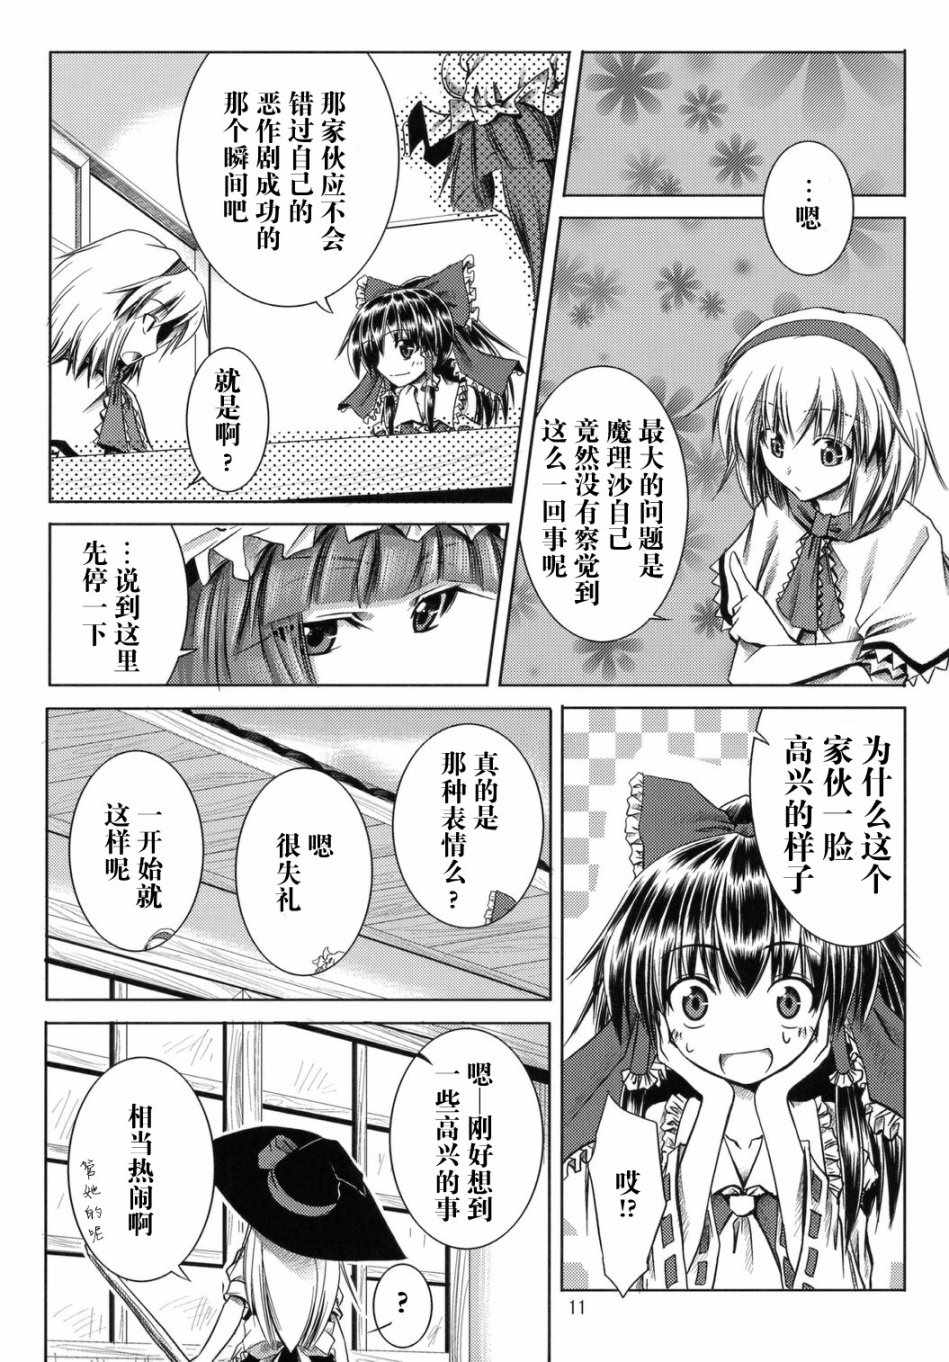 《Witchbroom troubles》漫画 短篇